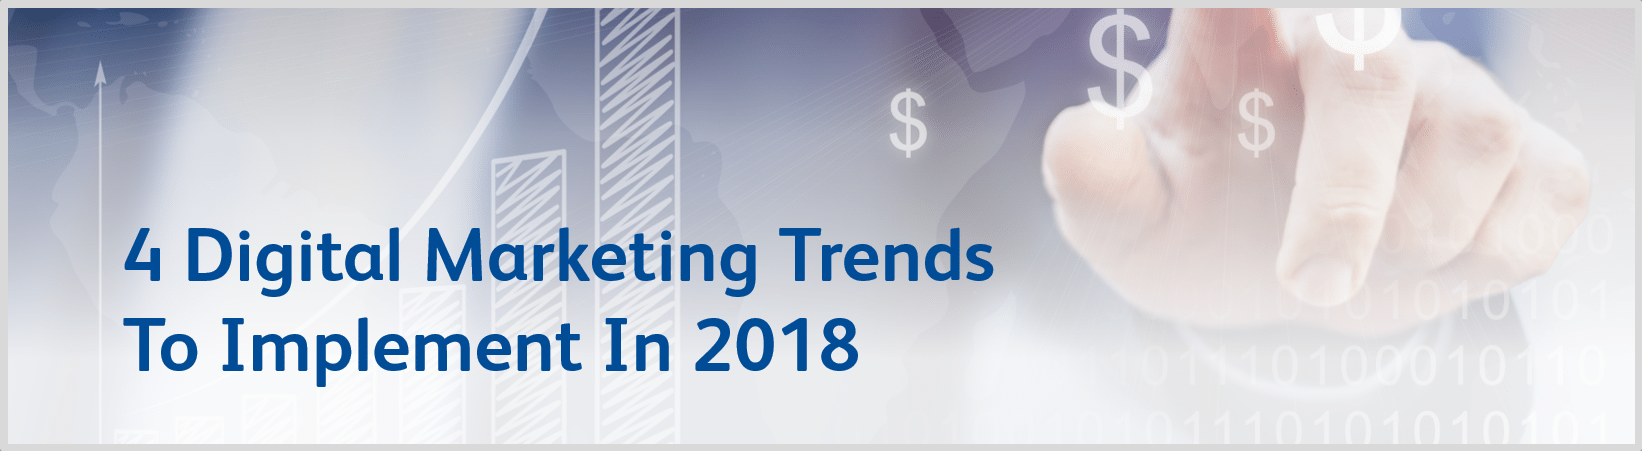 4 Digital Marketing Trends  To Implement In 2018